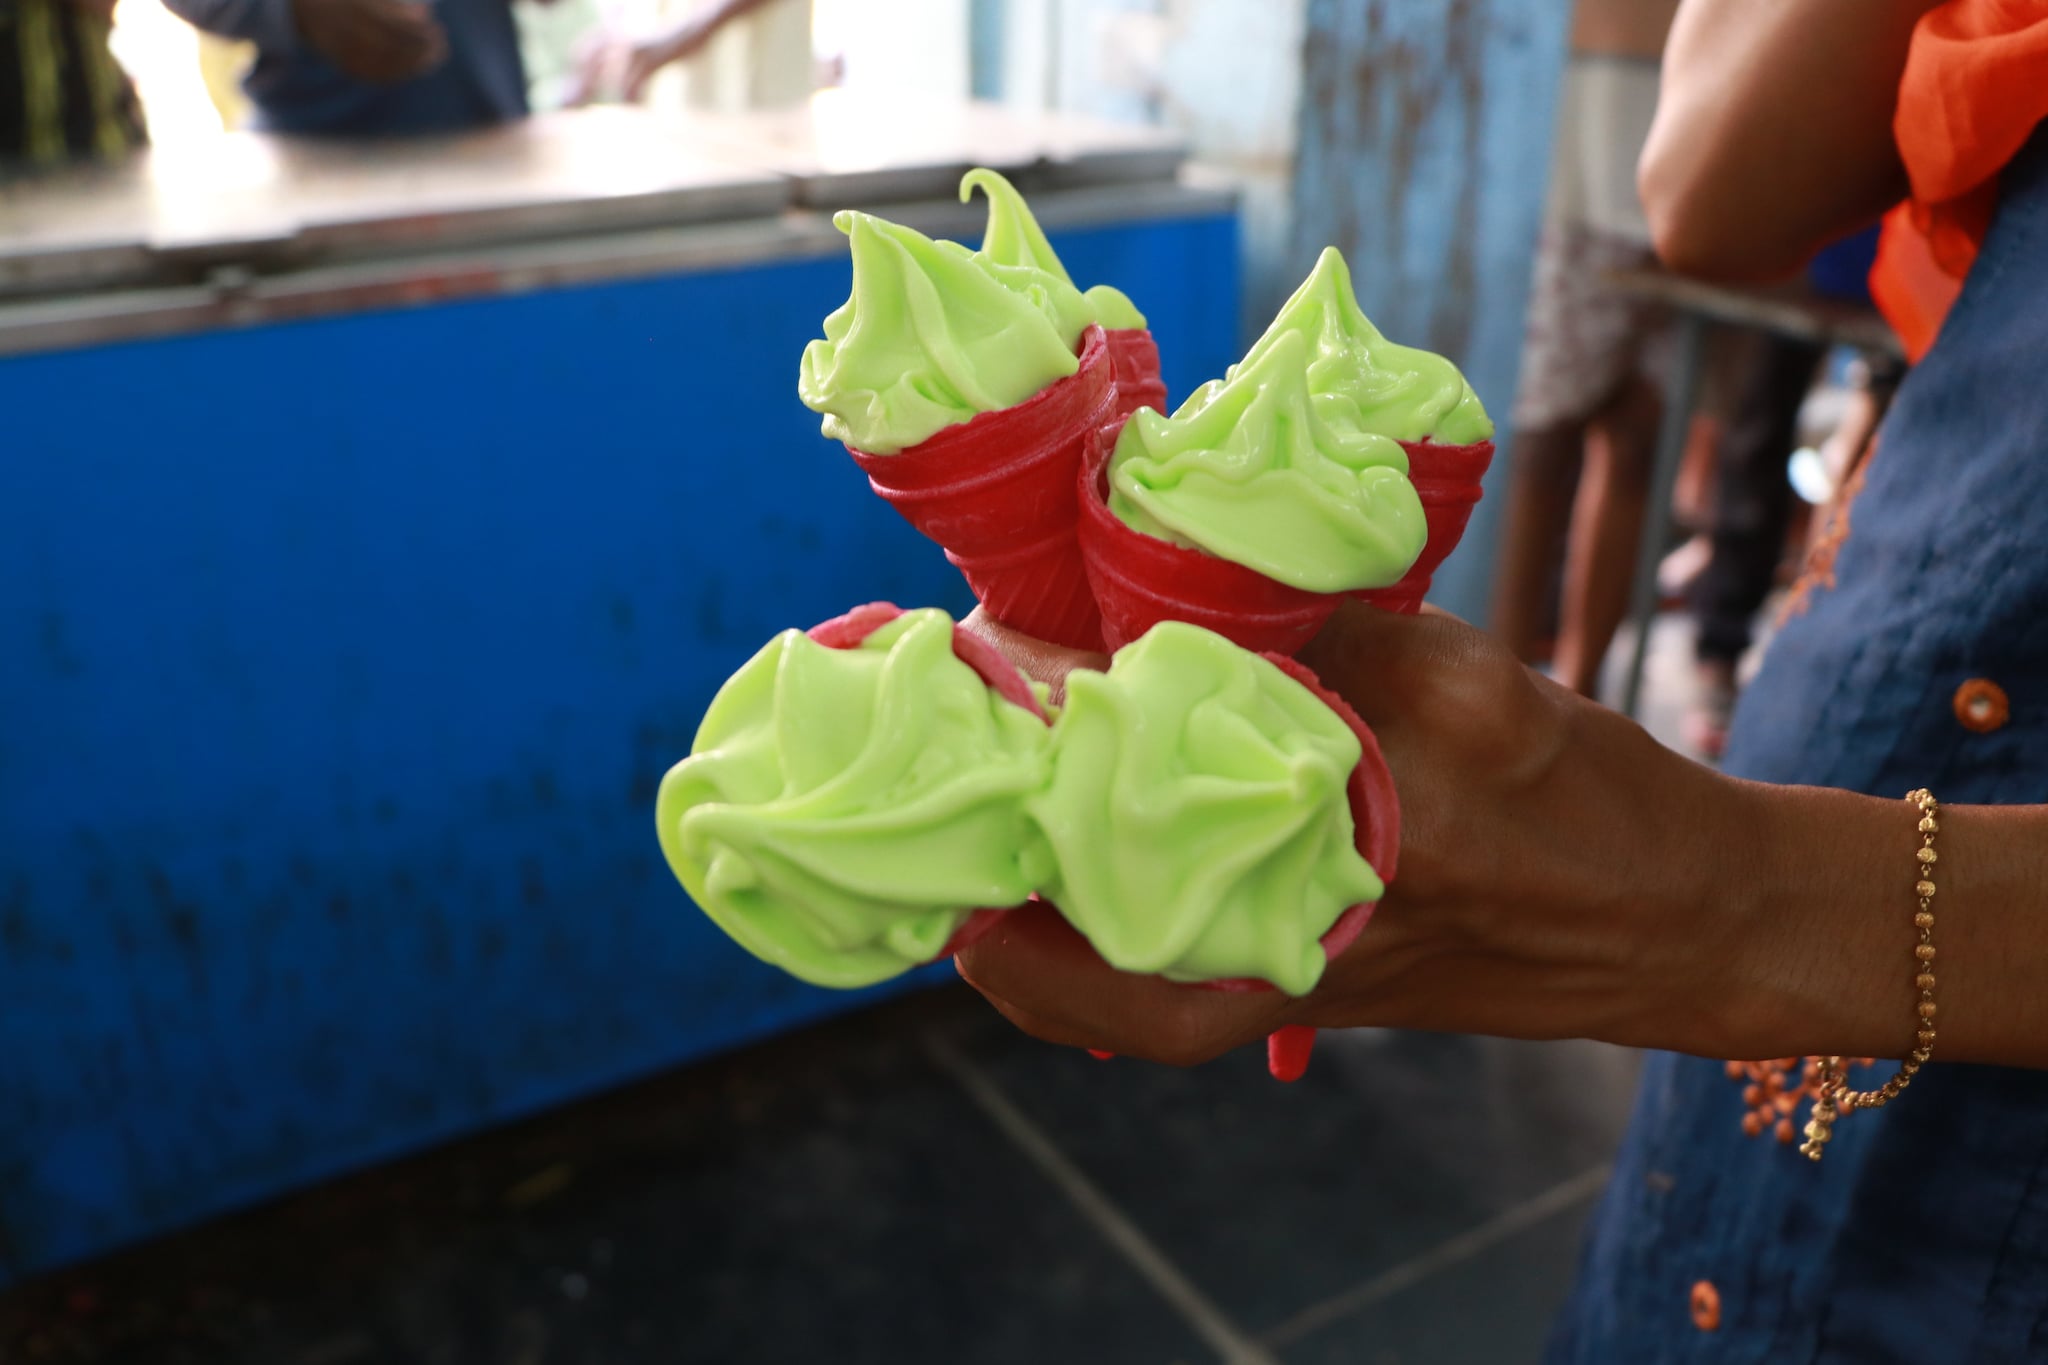 No 1. Cooling cravings: Sale of cold treats spiked this summer as Swiggy experienced a 16% increase in demand for ice creams/frozen desserts compared to last year. (Photo Credit: Dhieja Prabhavathy)